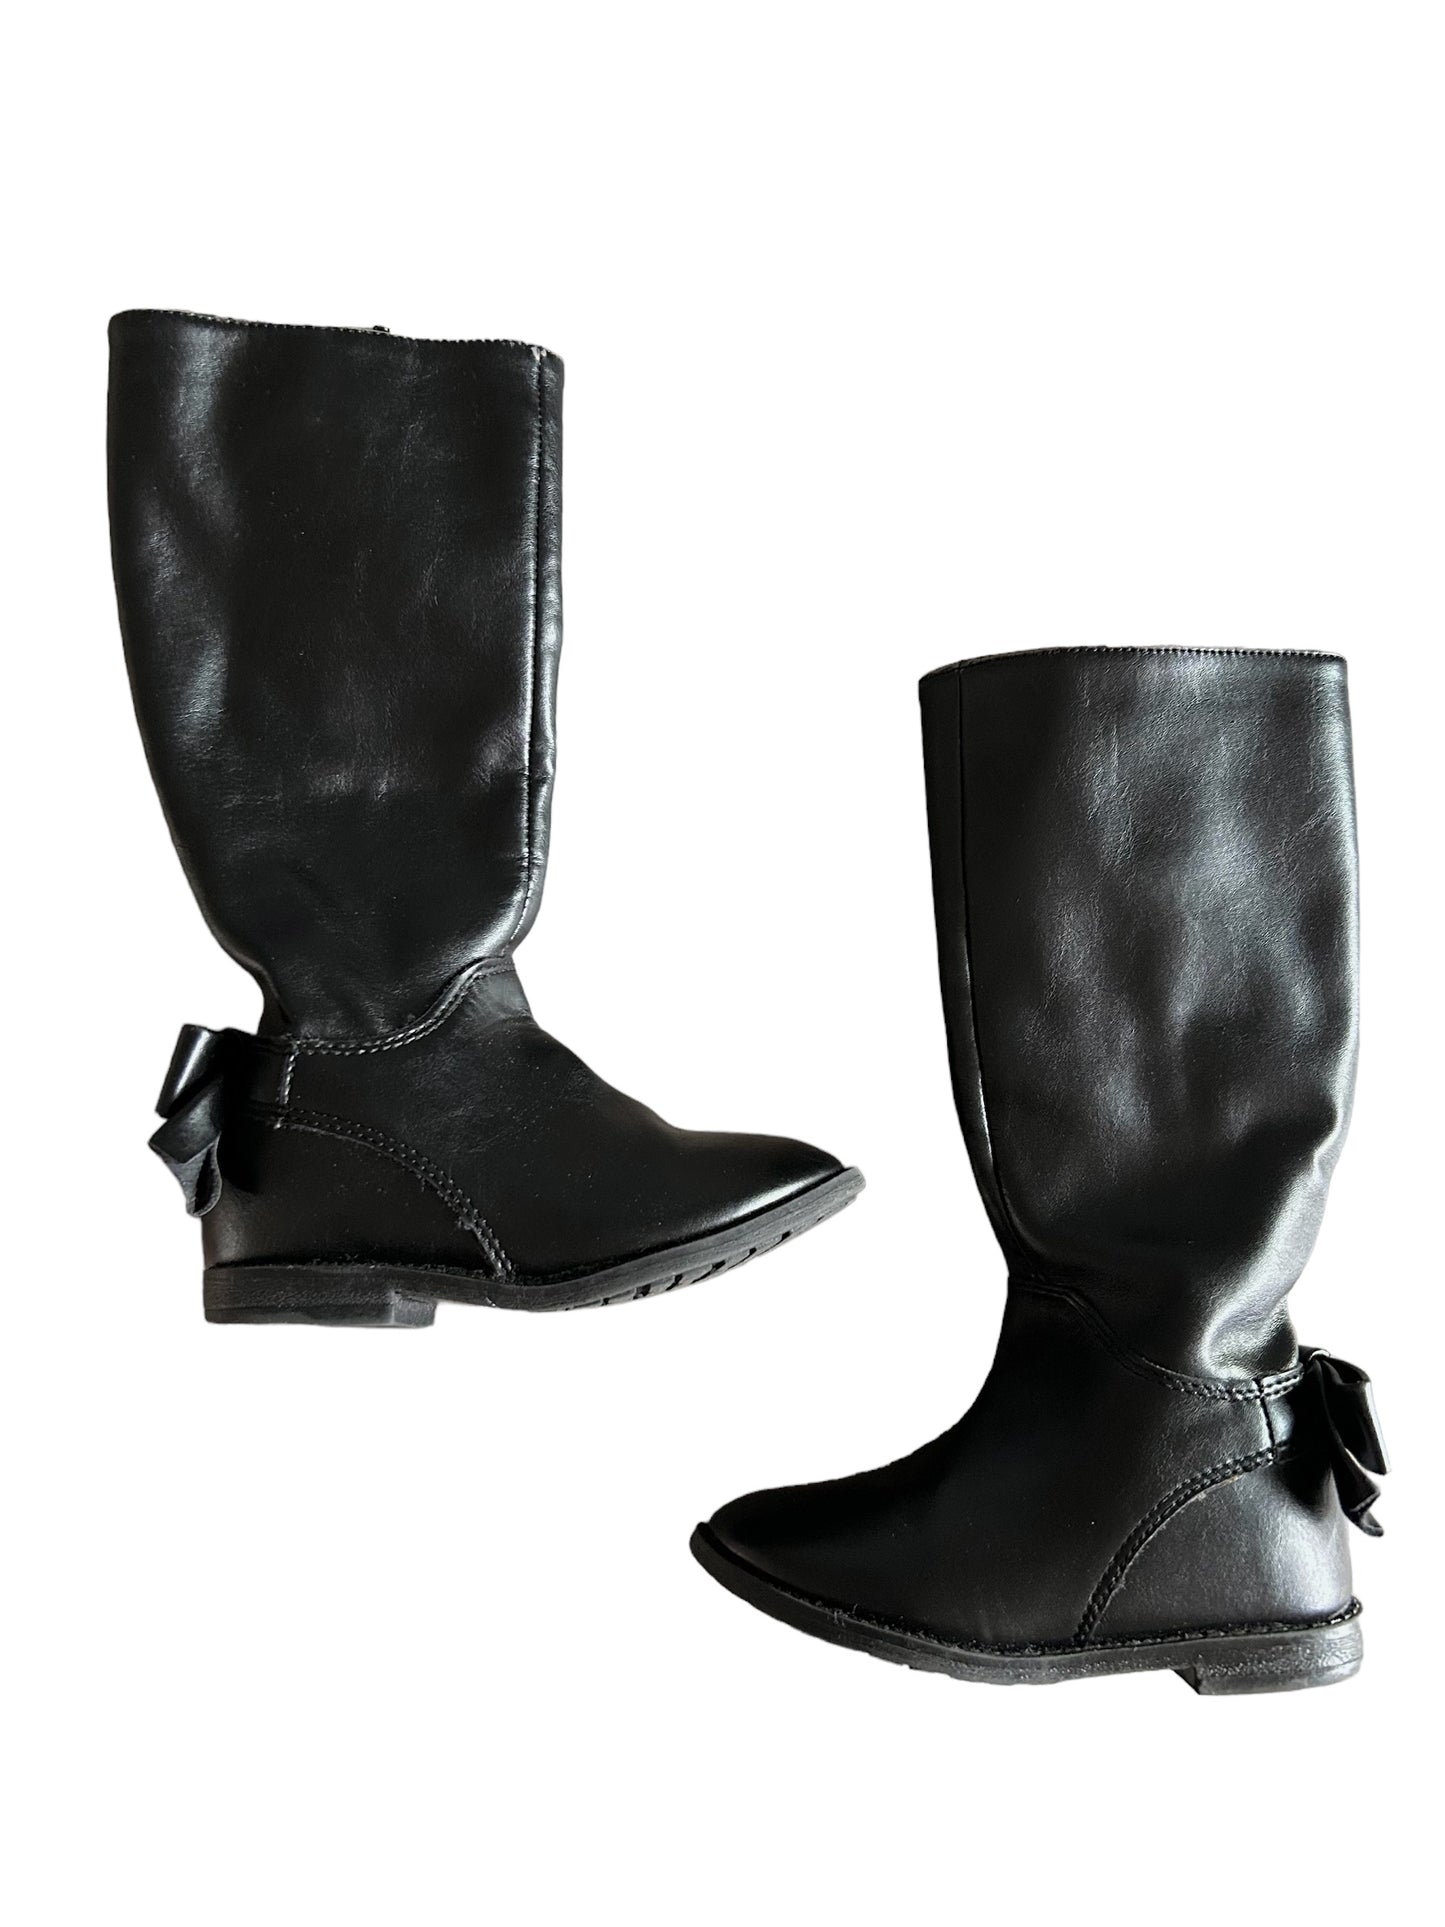 Bottes George taille 7